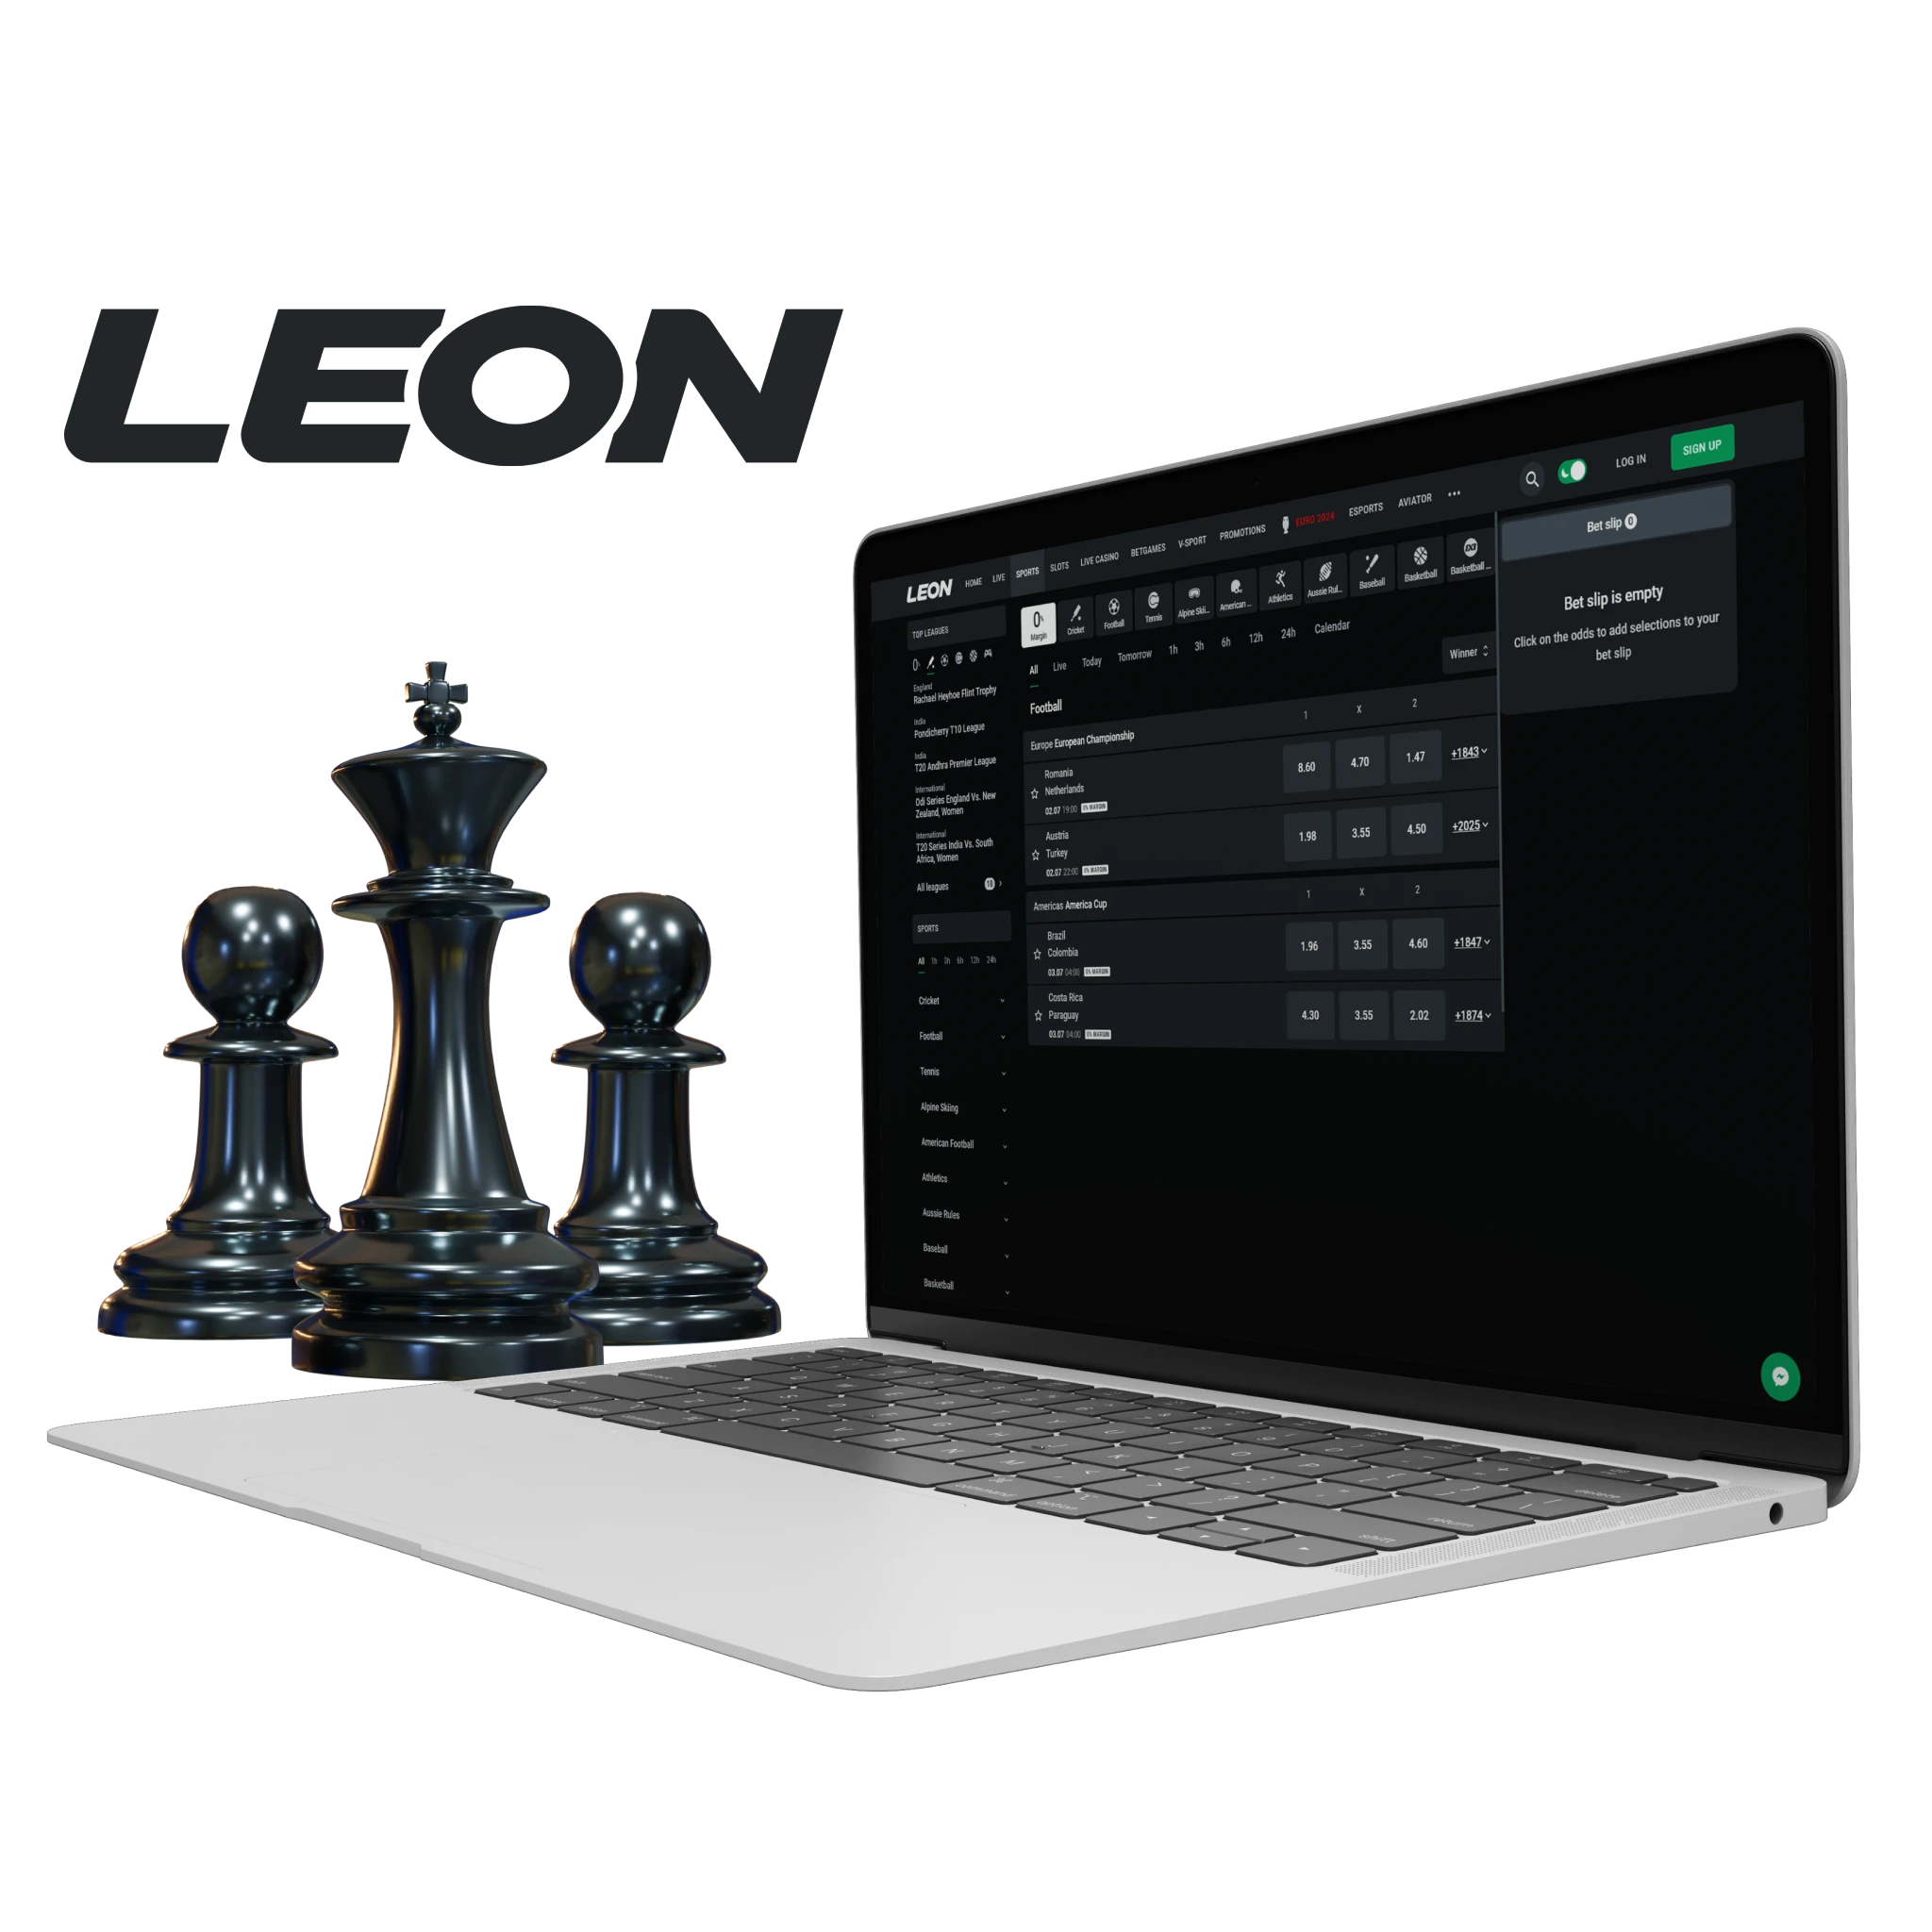 Leonbet provides a high quality service for chess betting.